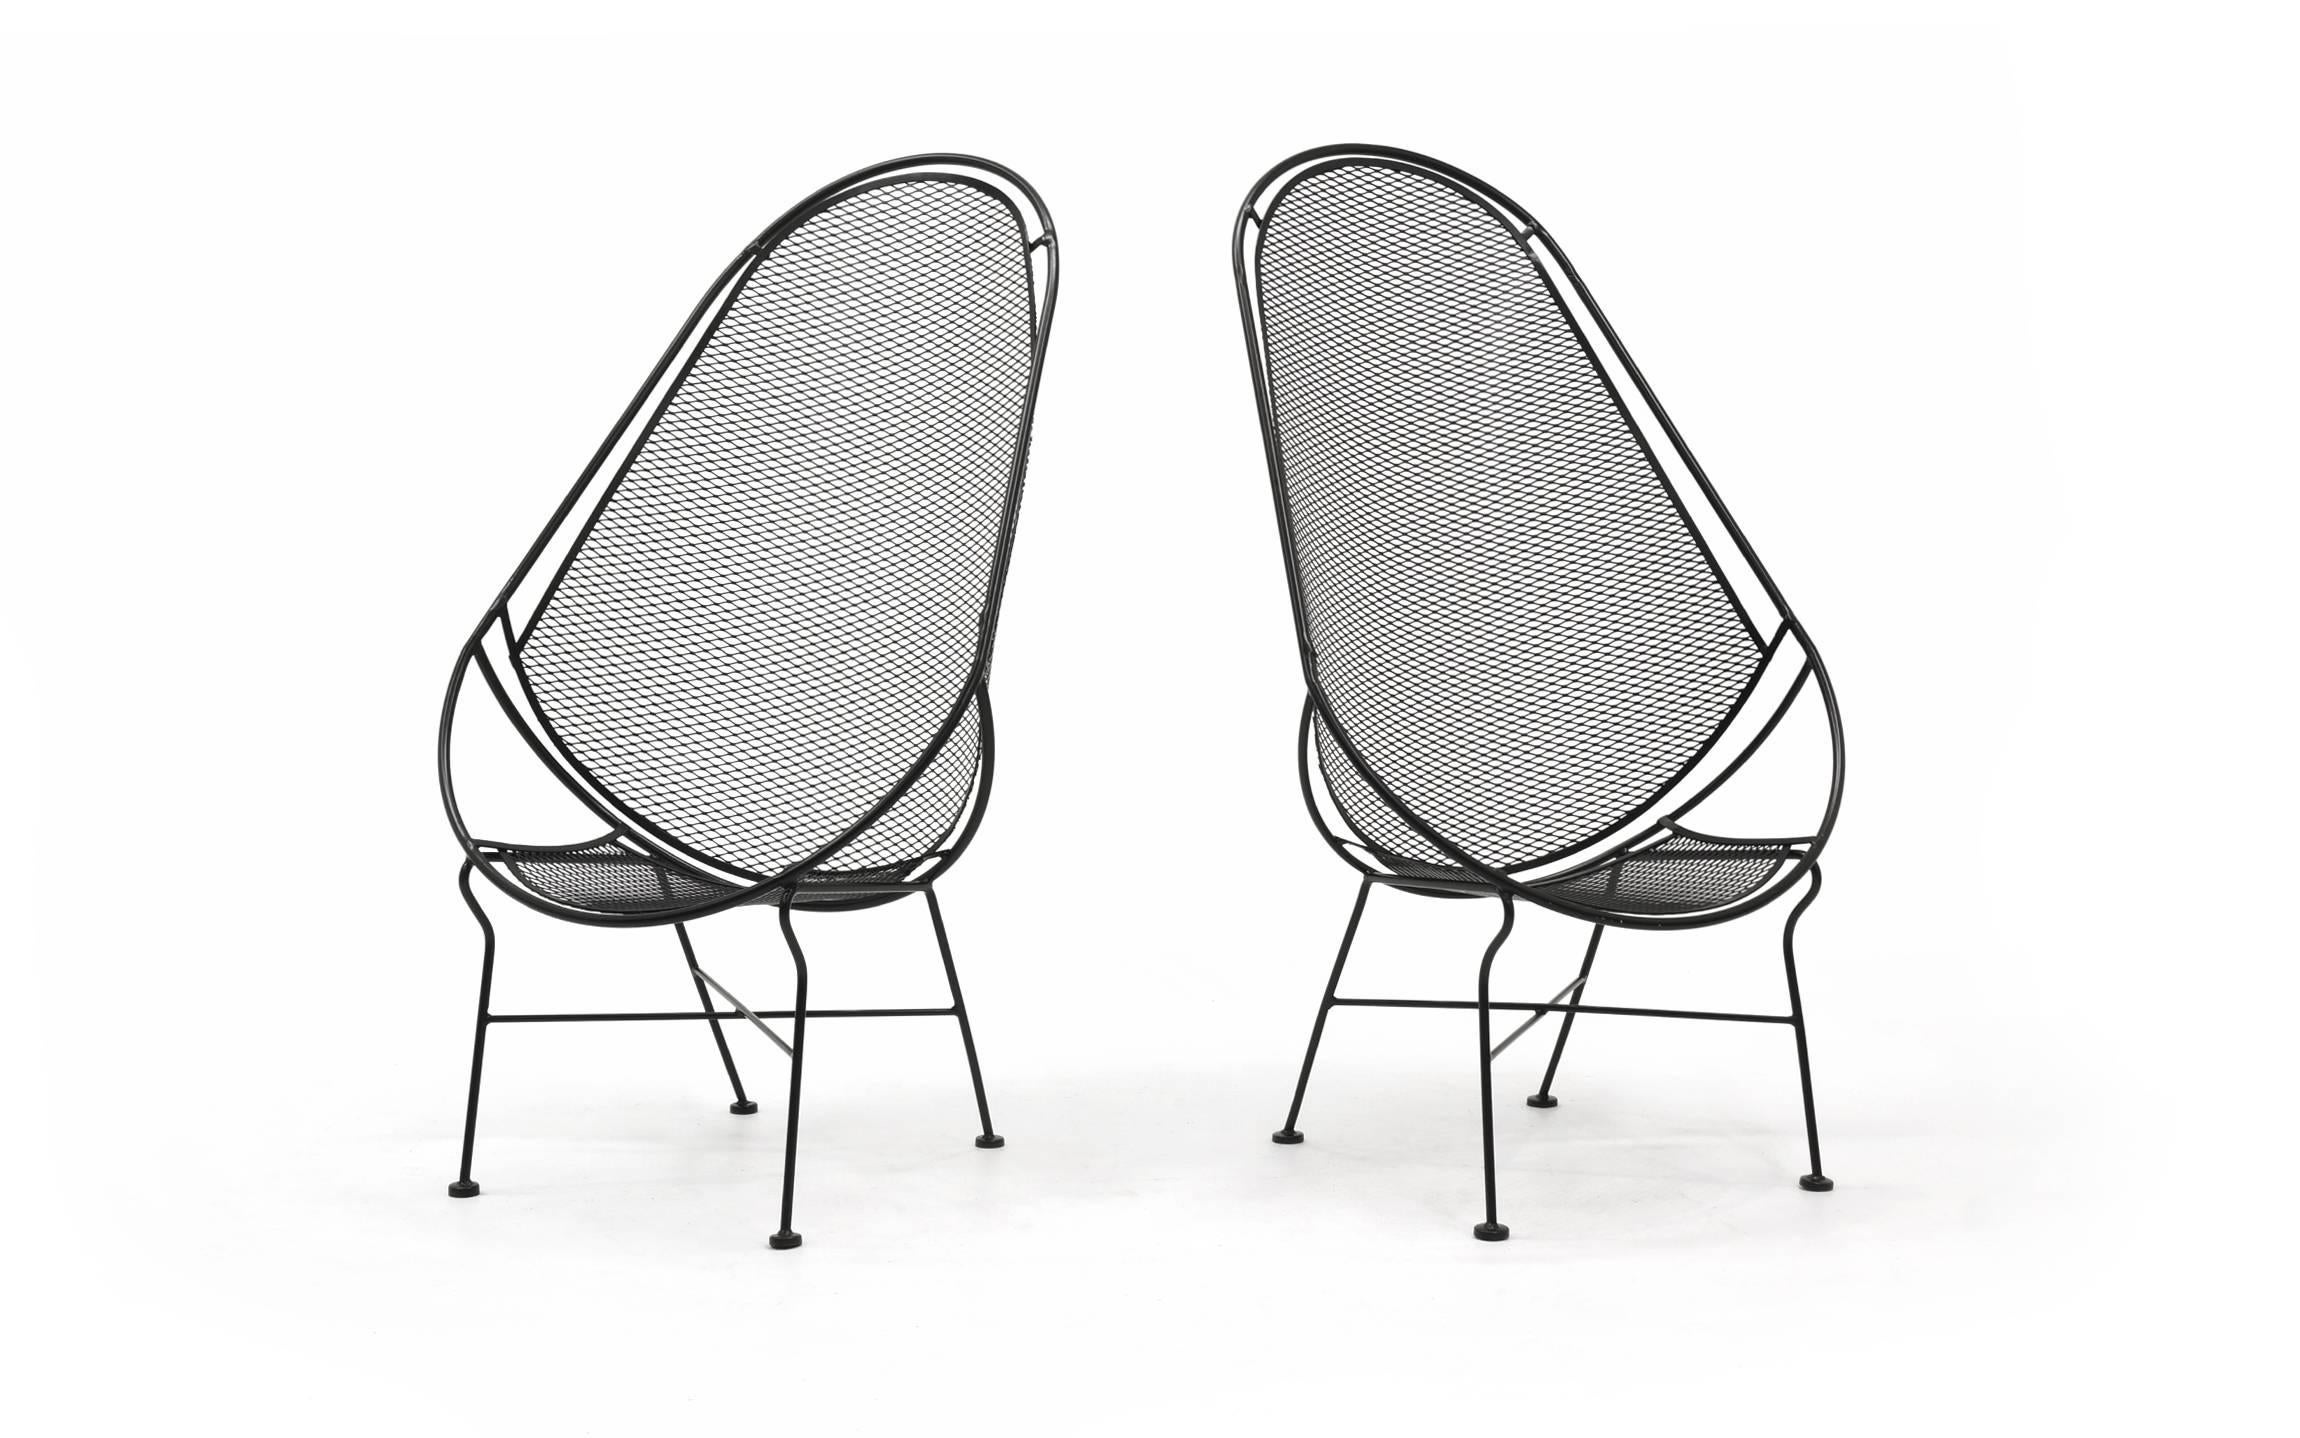 Expertly restored pair of John Salterini chairs. Very rare version of the high back design. Very comfortable as well. Expertly restored and powder coated in smooth satin black finish. Designed for outdoor, pool, patio use, these can work great